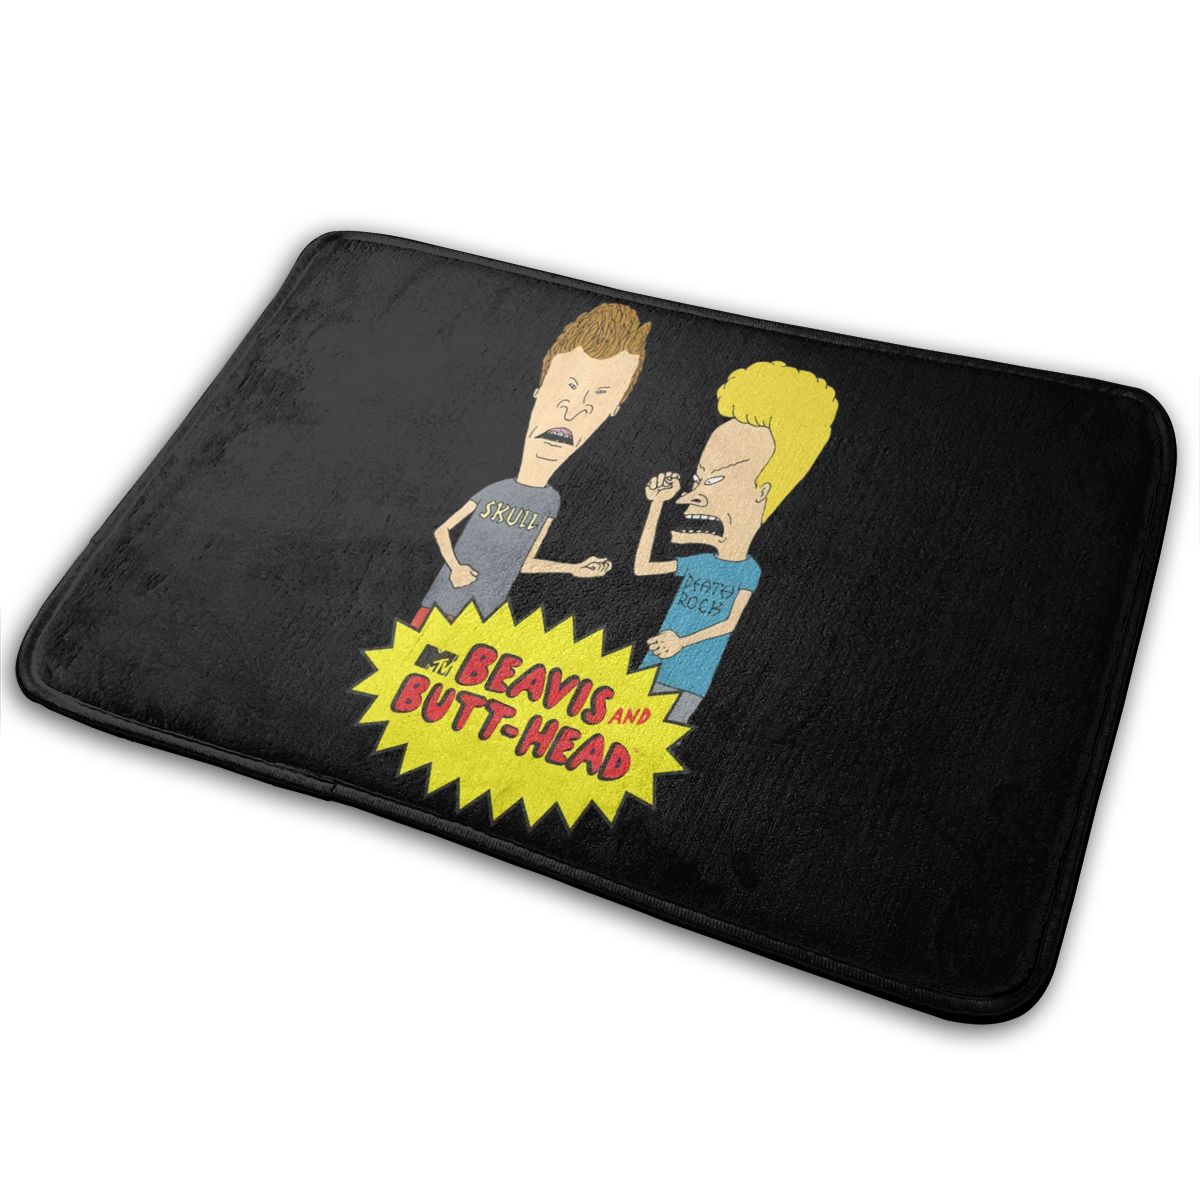 Beavis And Butthead - Good Quality Fashion Rug Carpet - Great Gift For The retro MTV Fan-